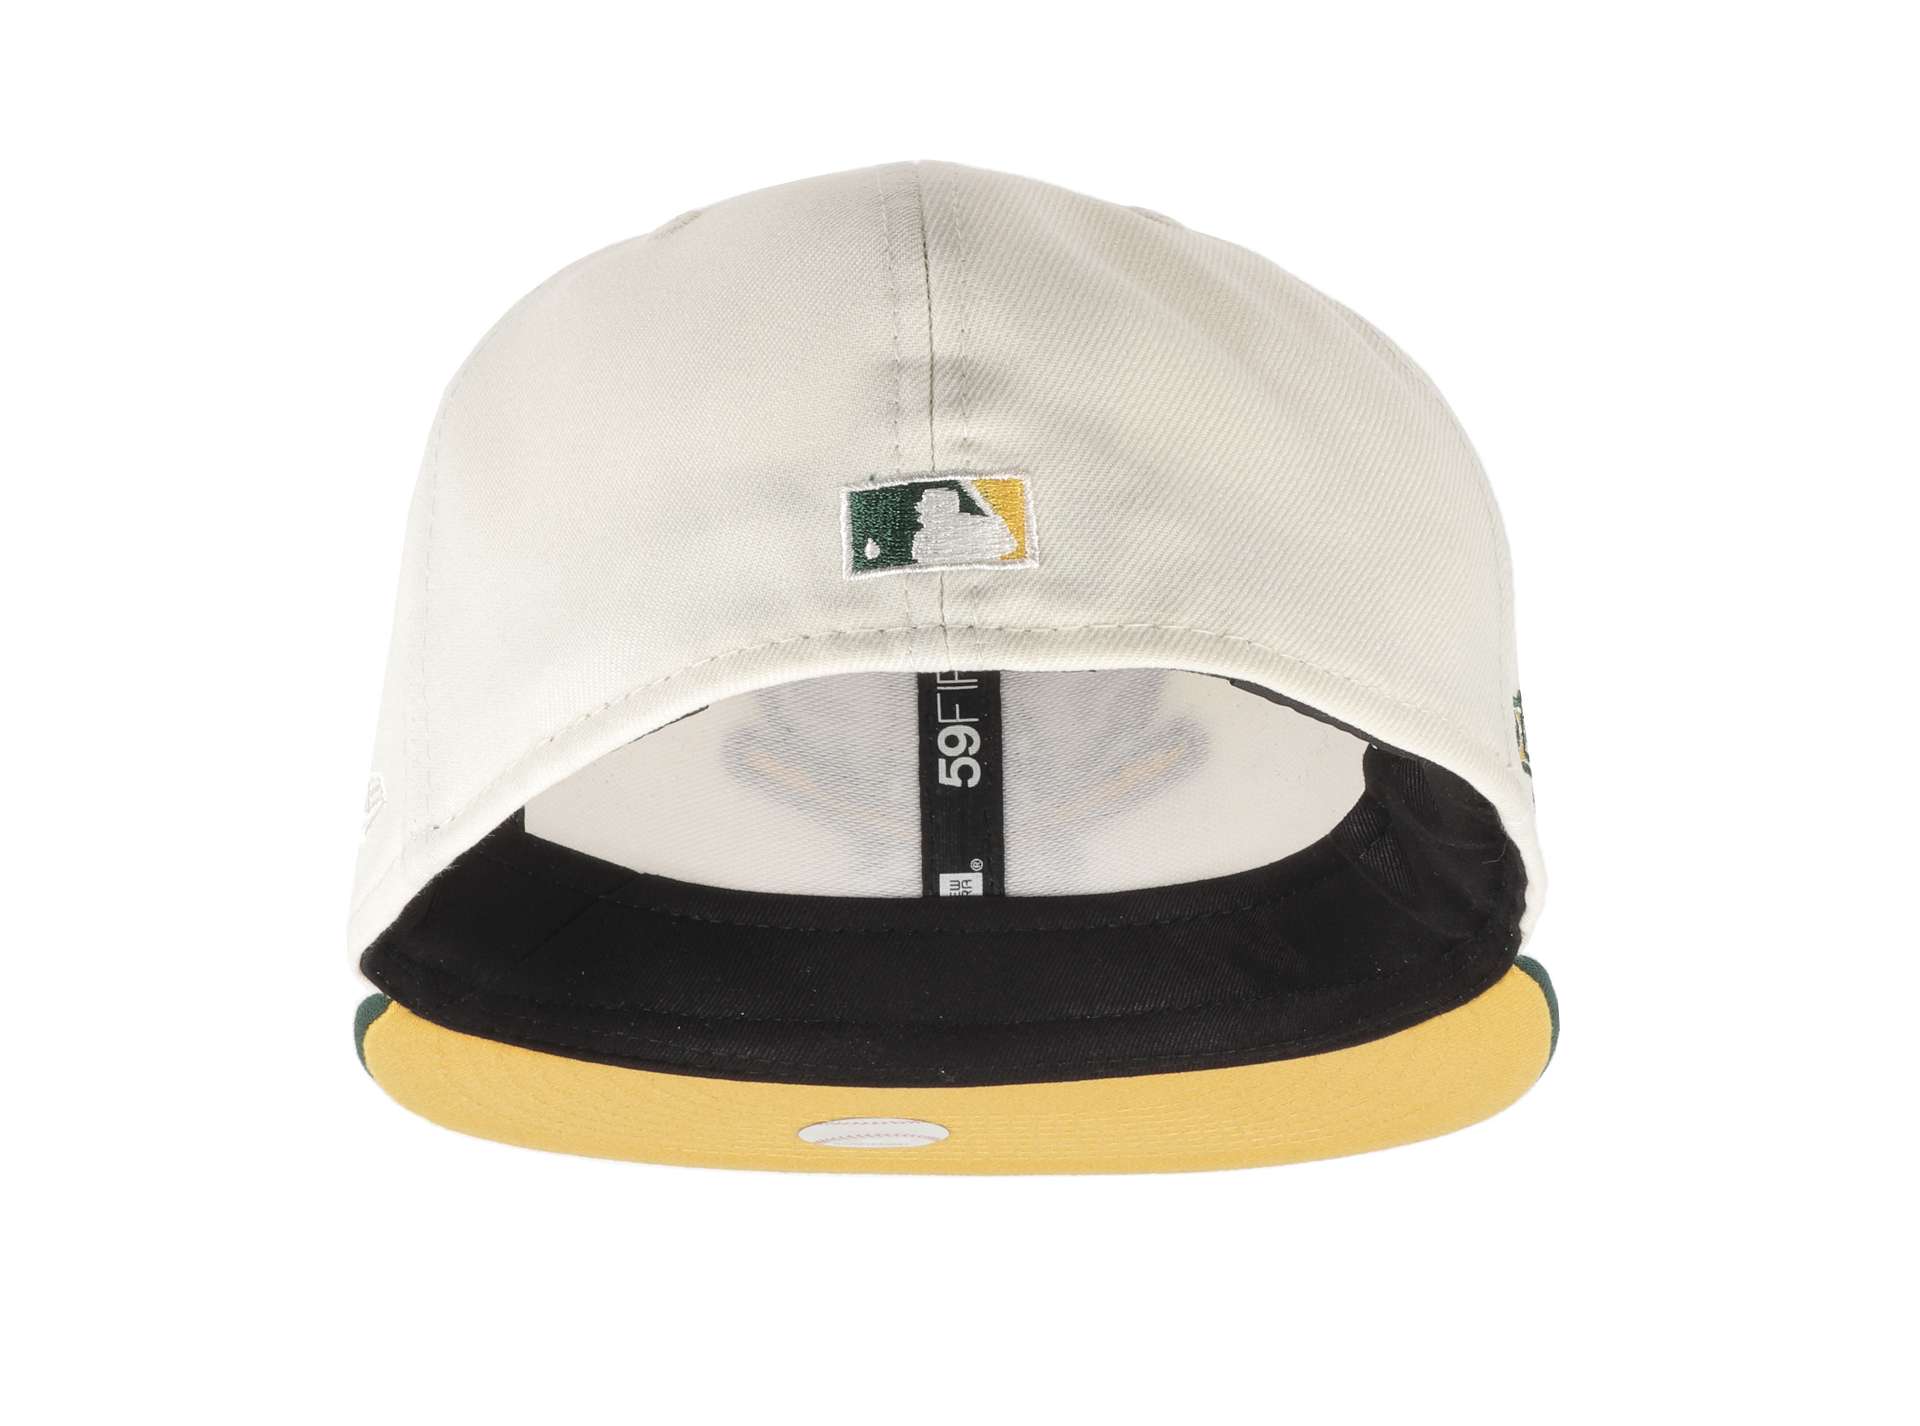 Oakland Athletics MLB Cooperstown 40th AnniversarySidepatch Chrome 59Fifty Basecap New Era